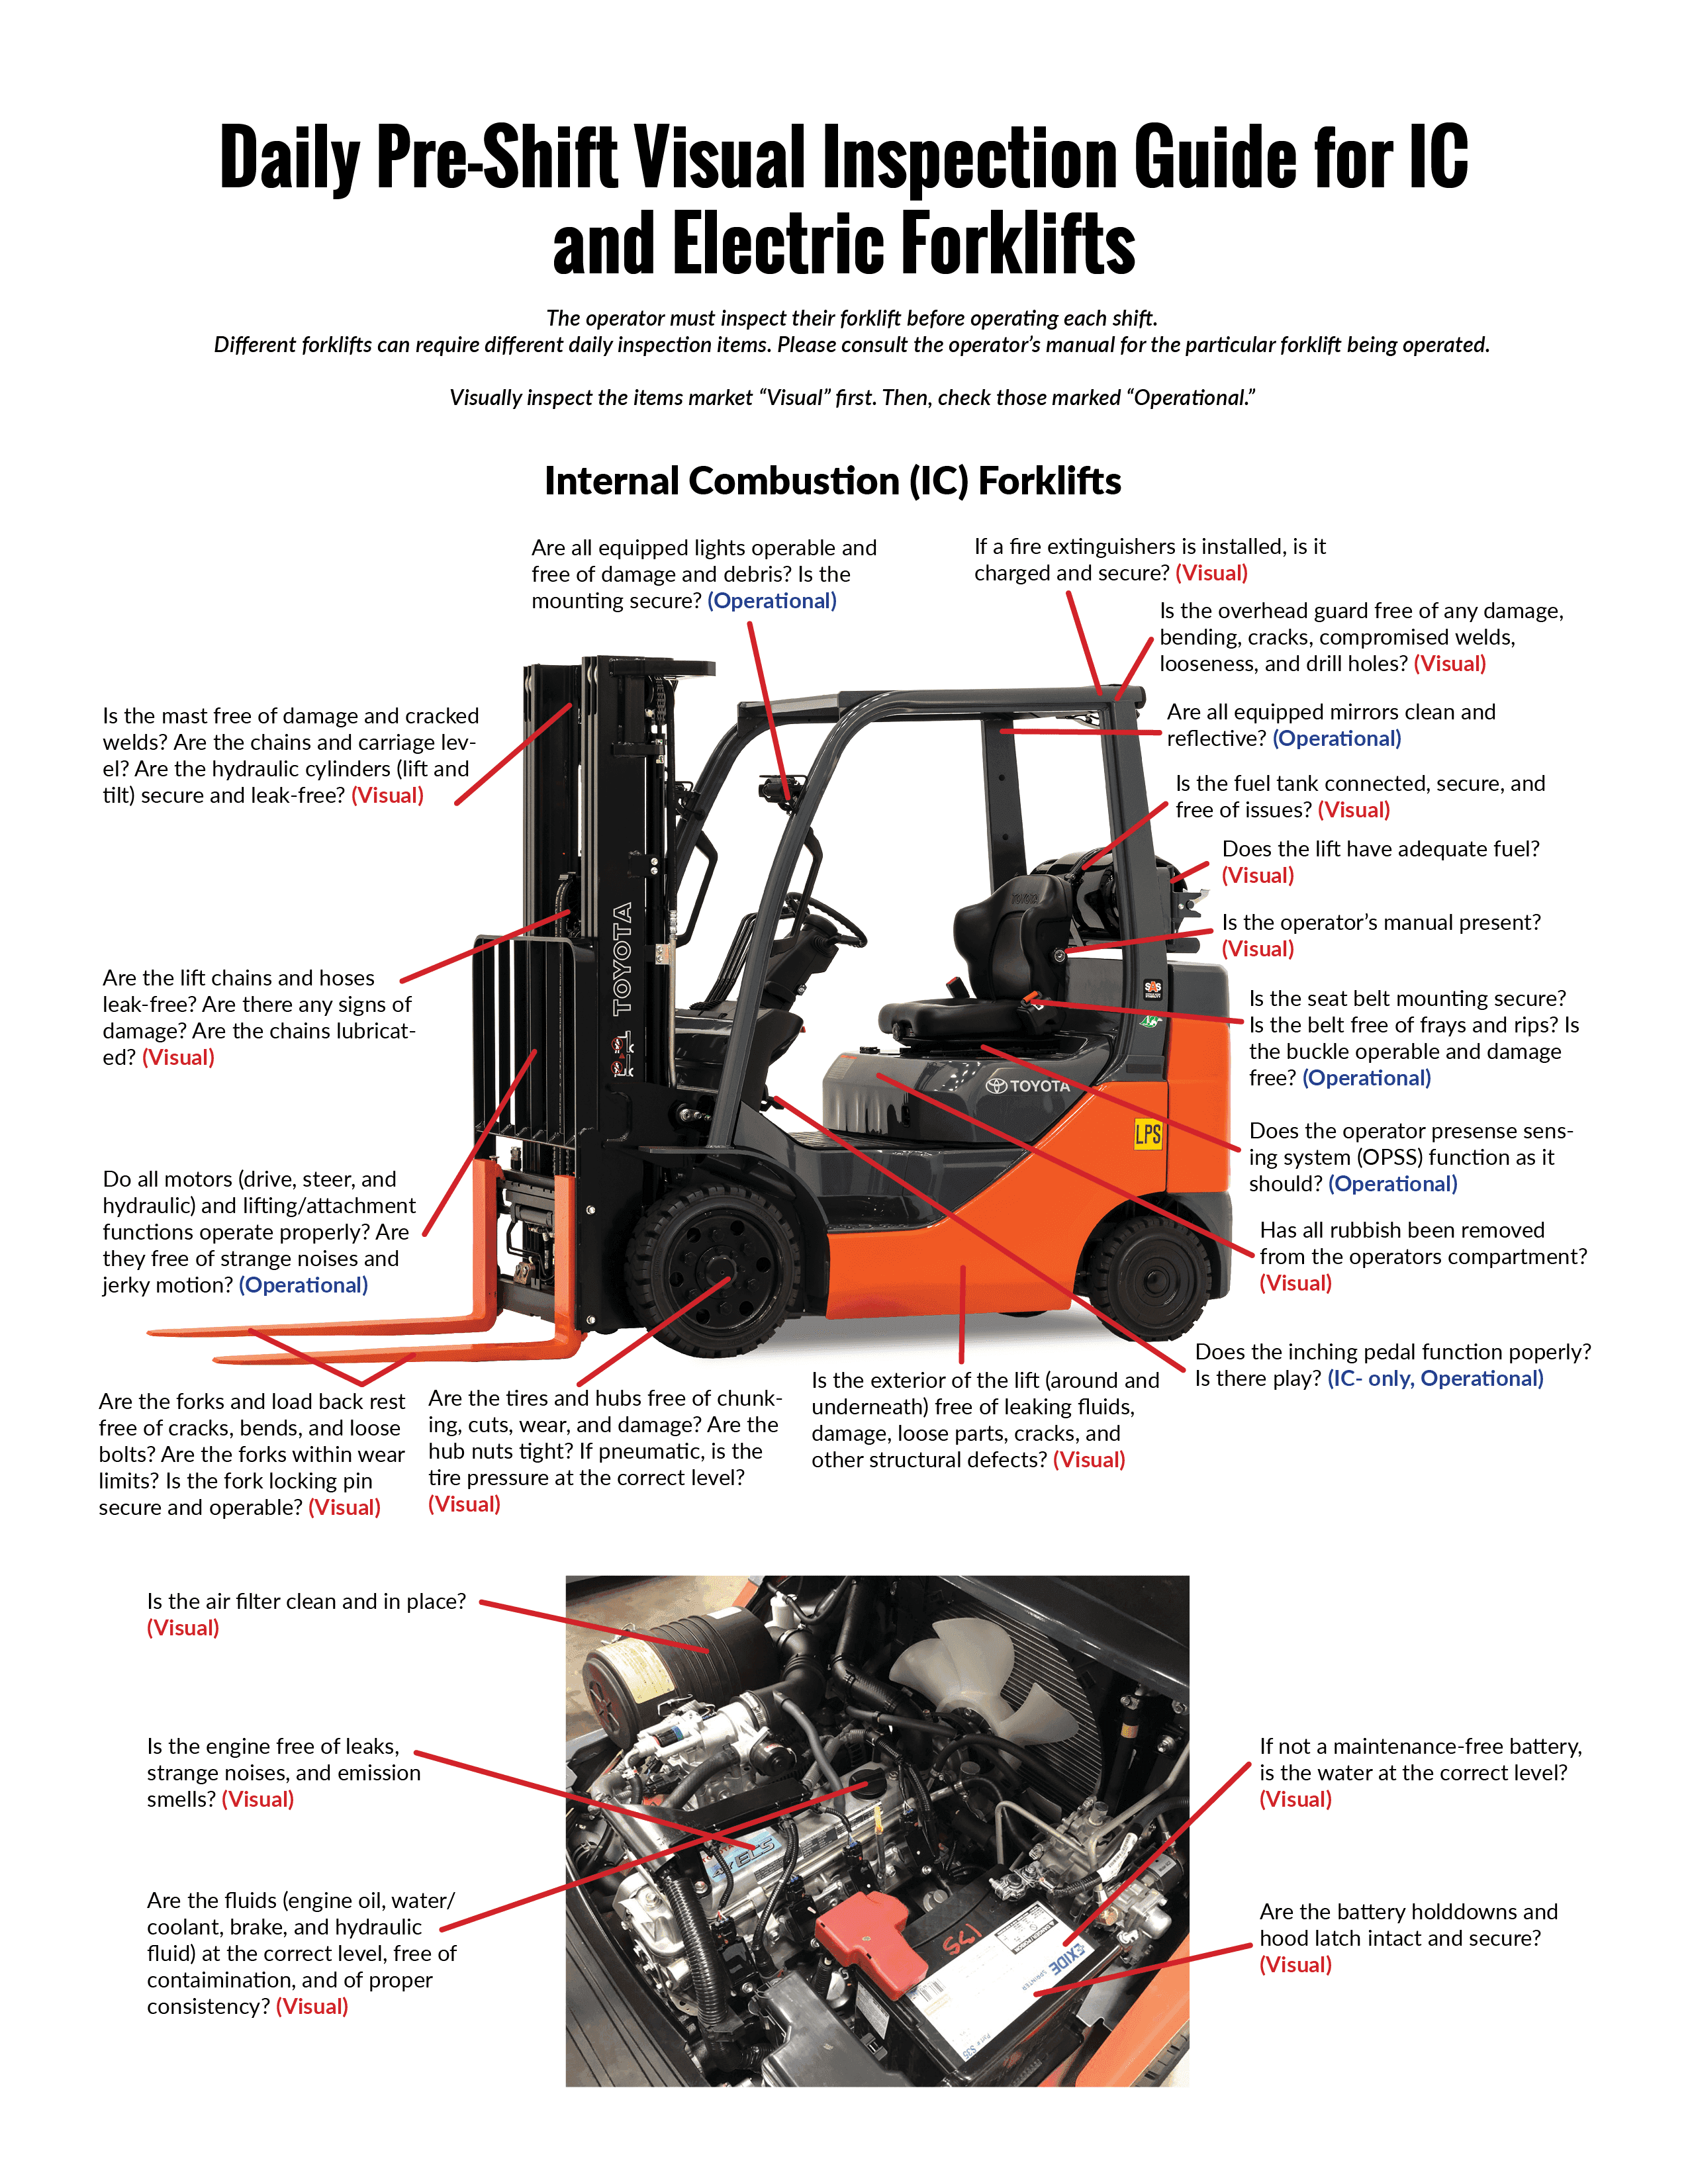 Items to check for internal combustion and electric forklift pre-trip inspections